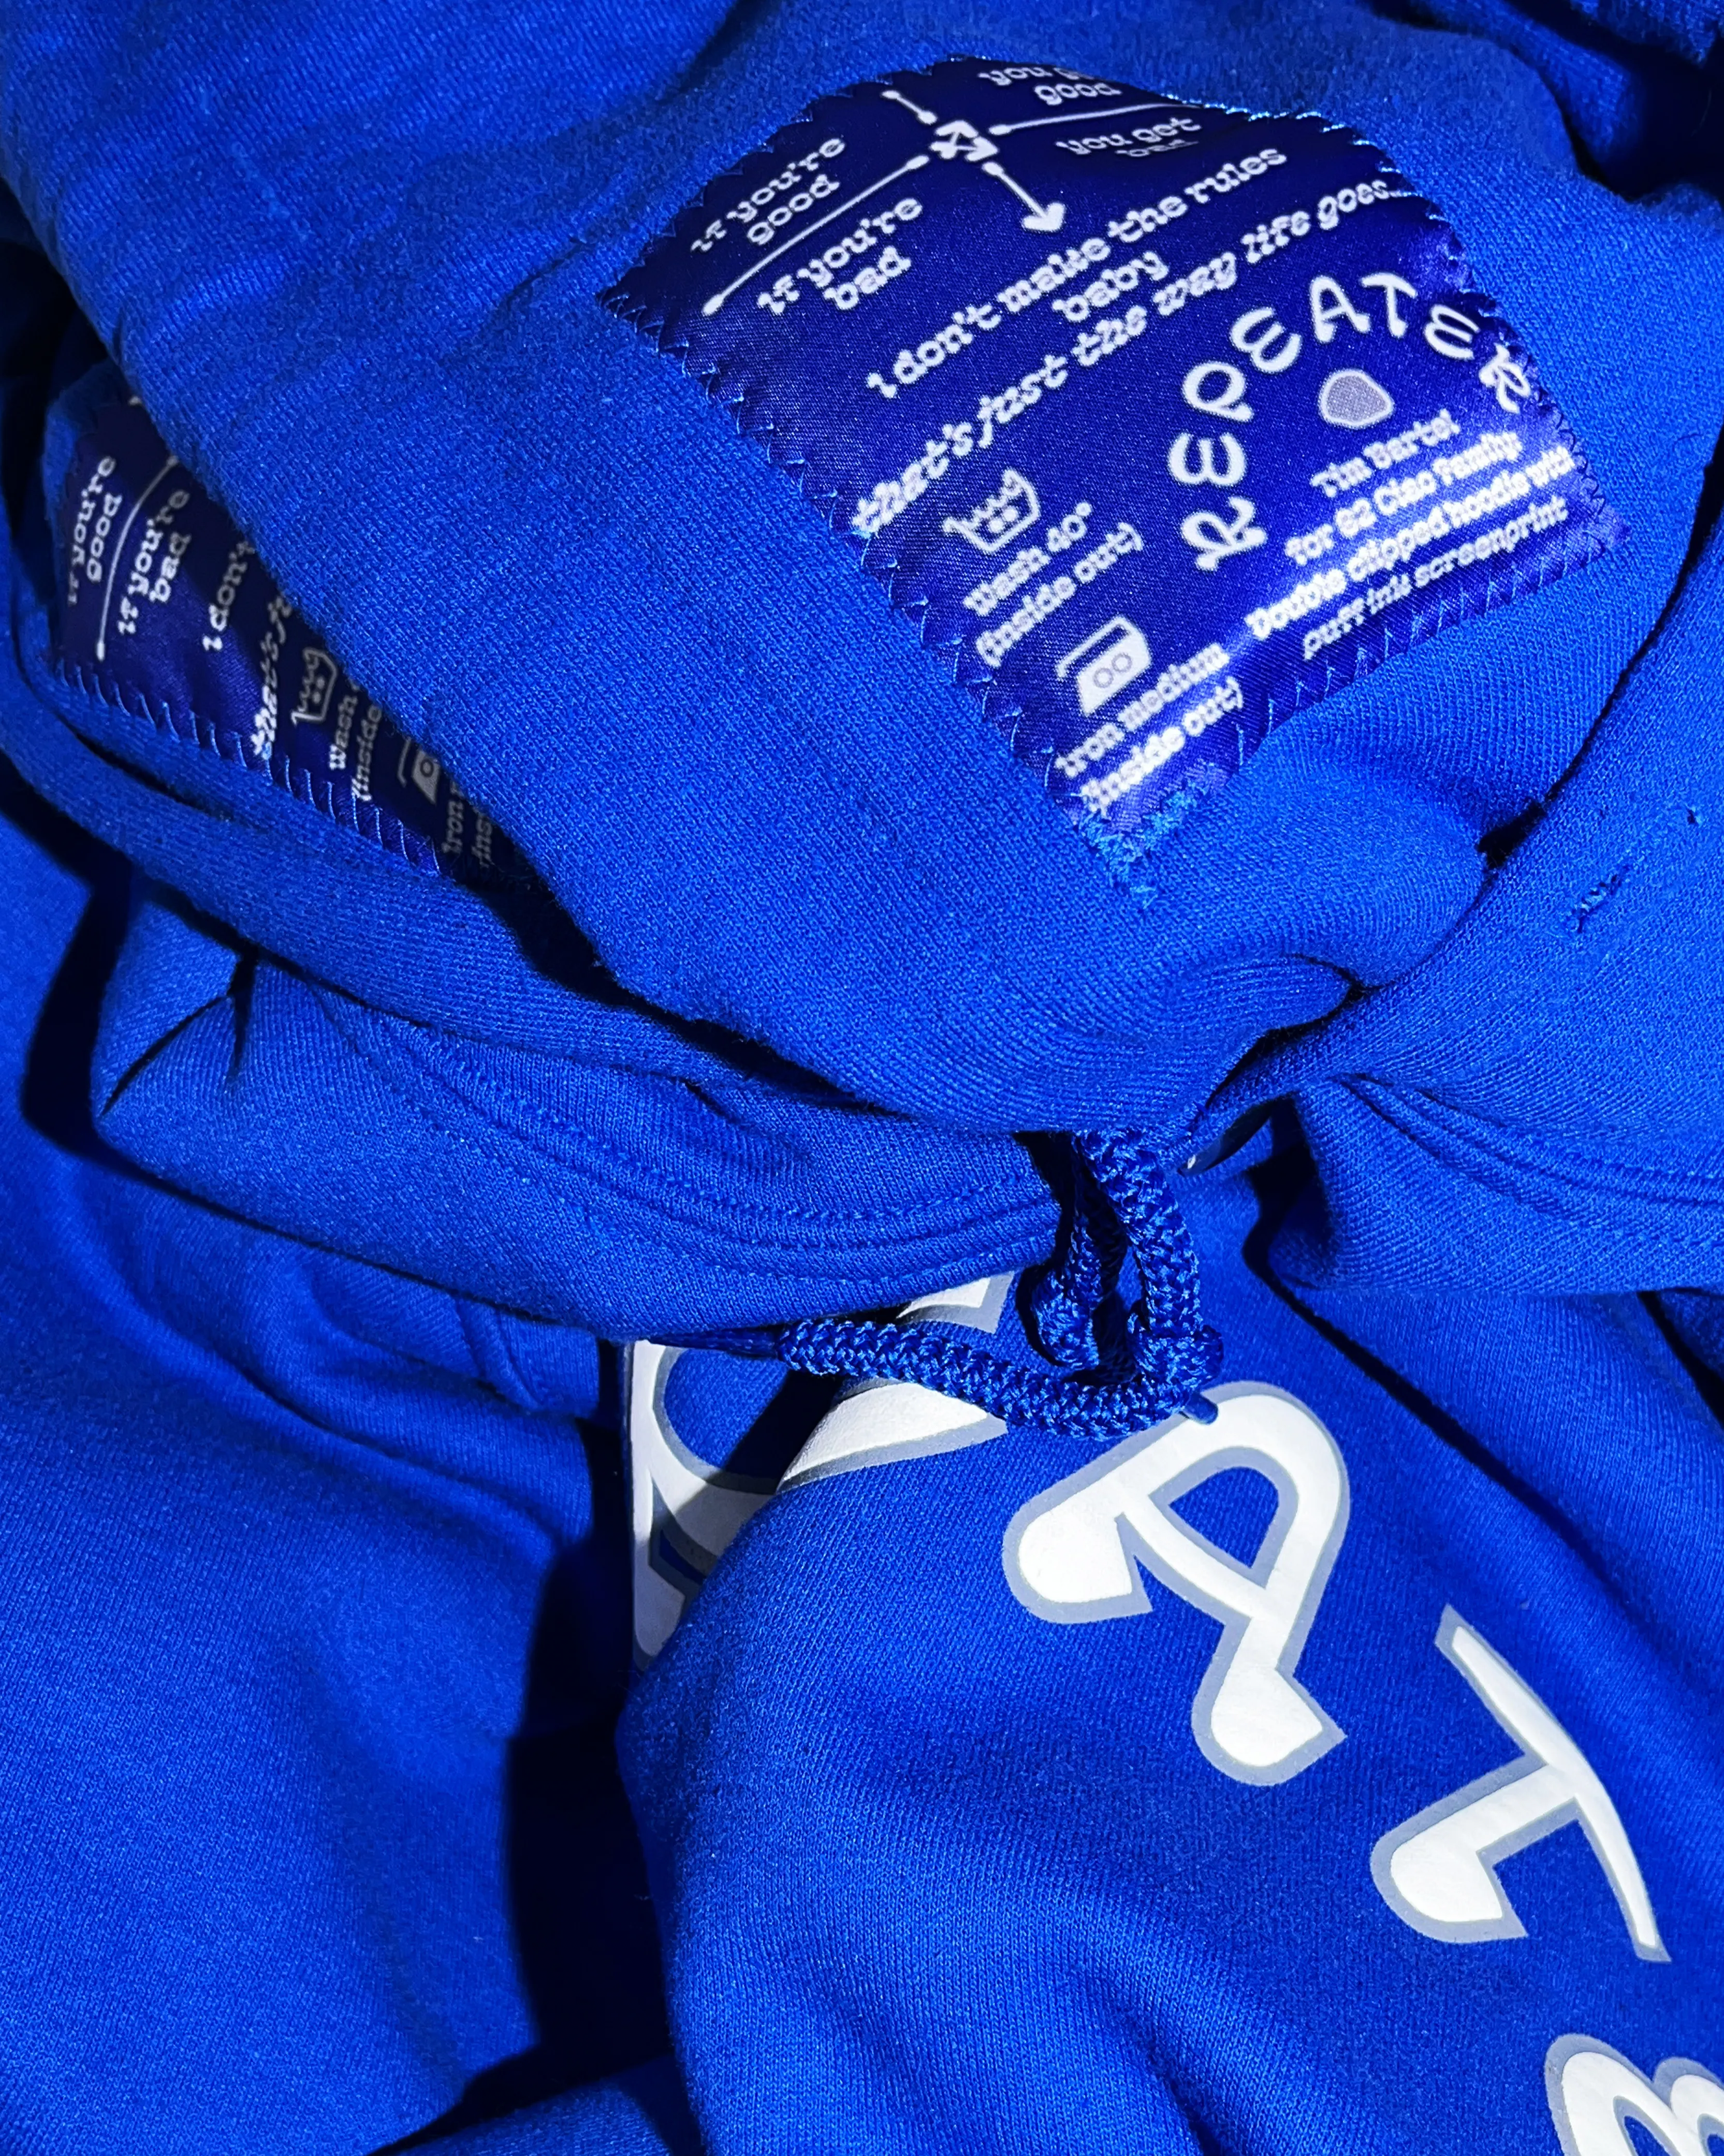 Image showing the rear of the hoodie